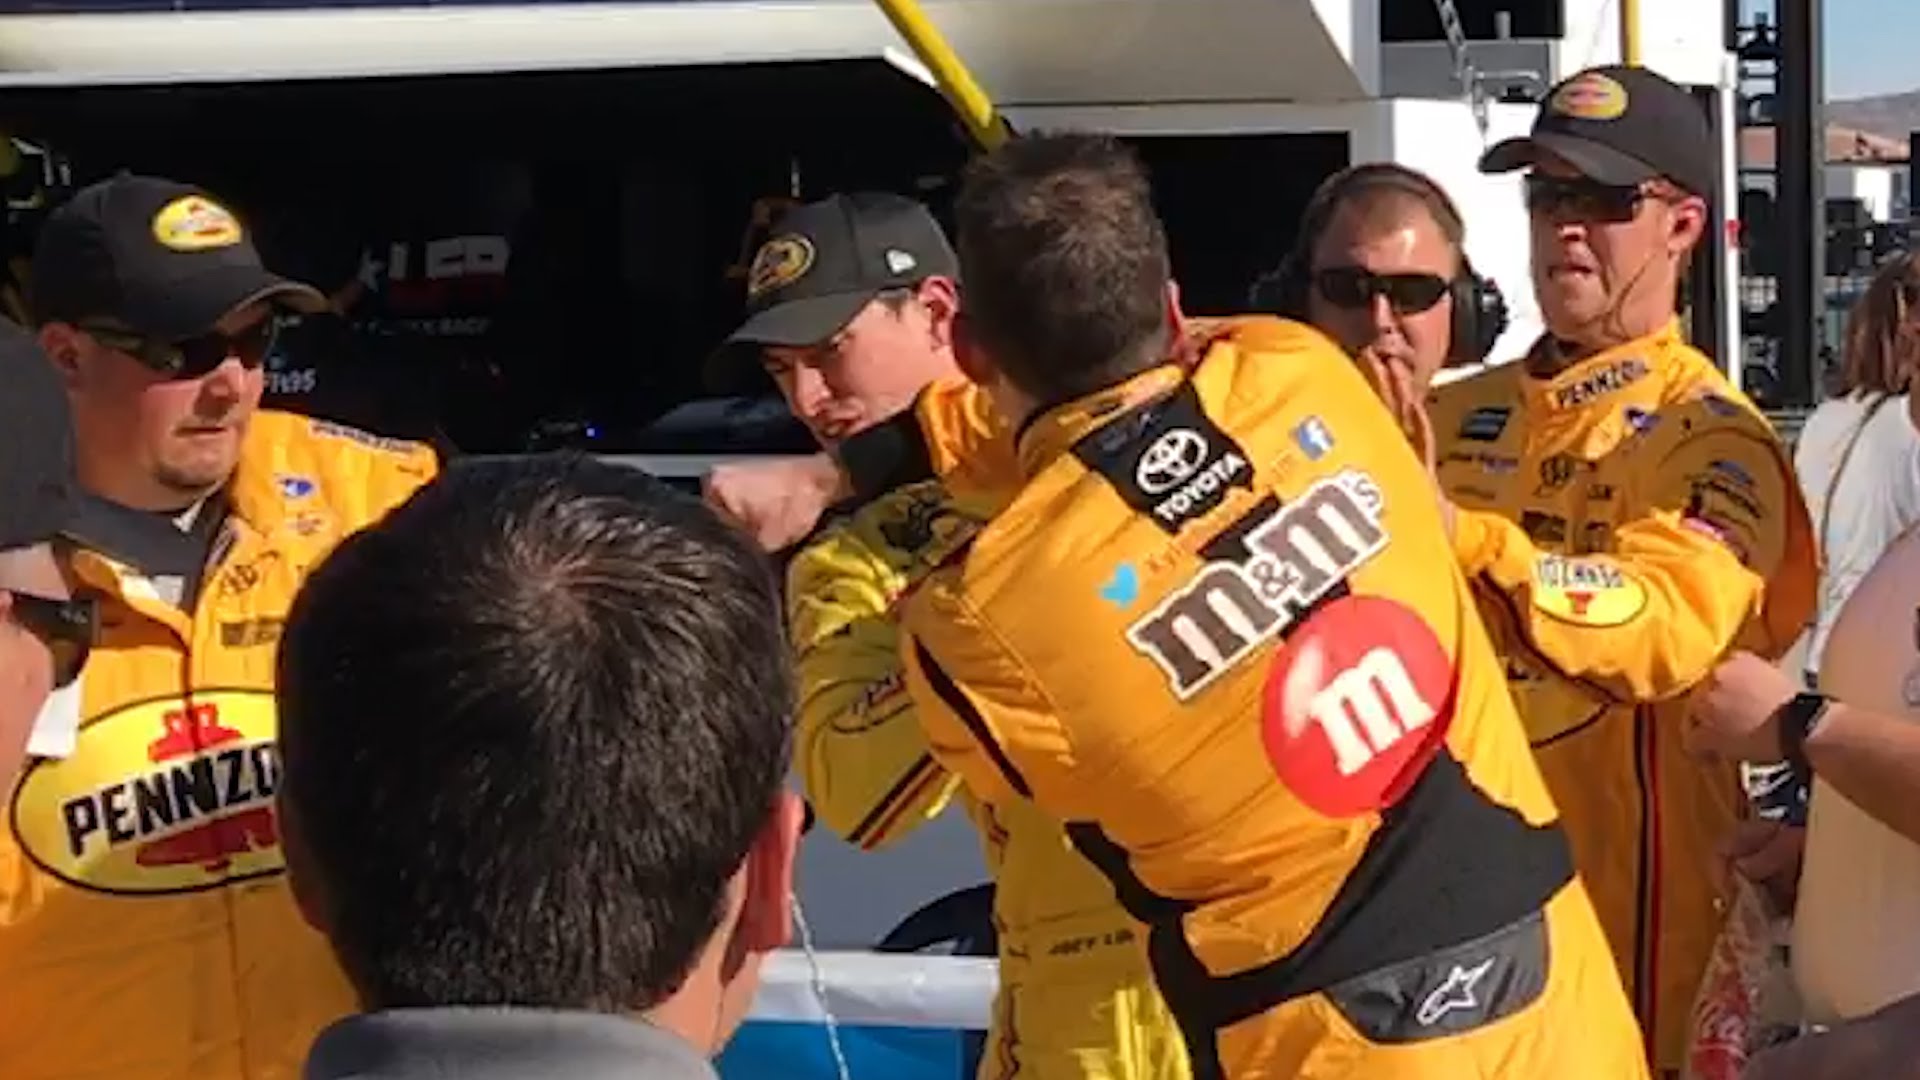 NASCAR racer Kyle Busch punches Joey Logano in the face